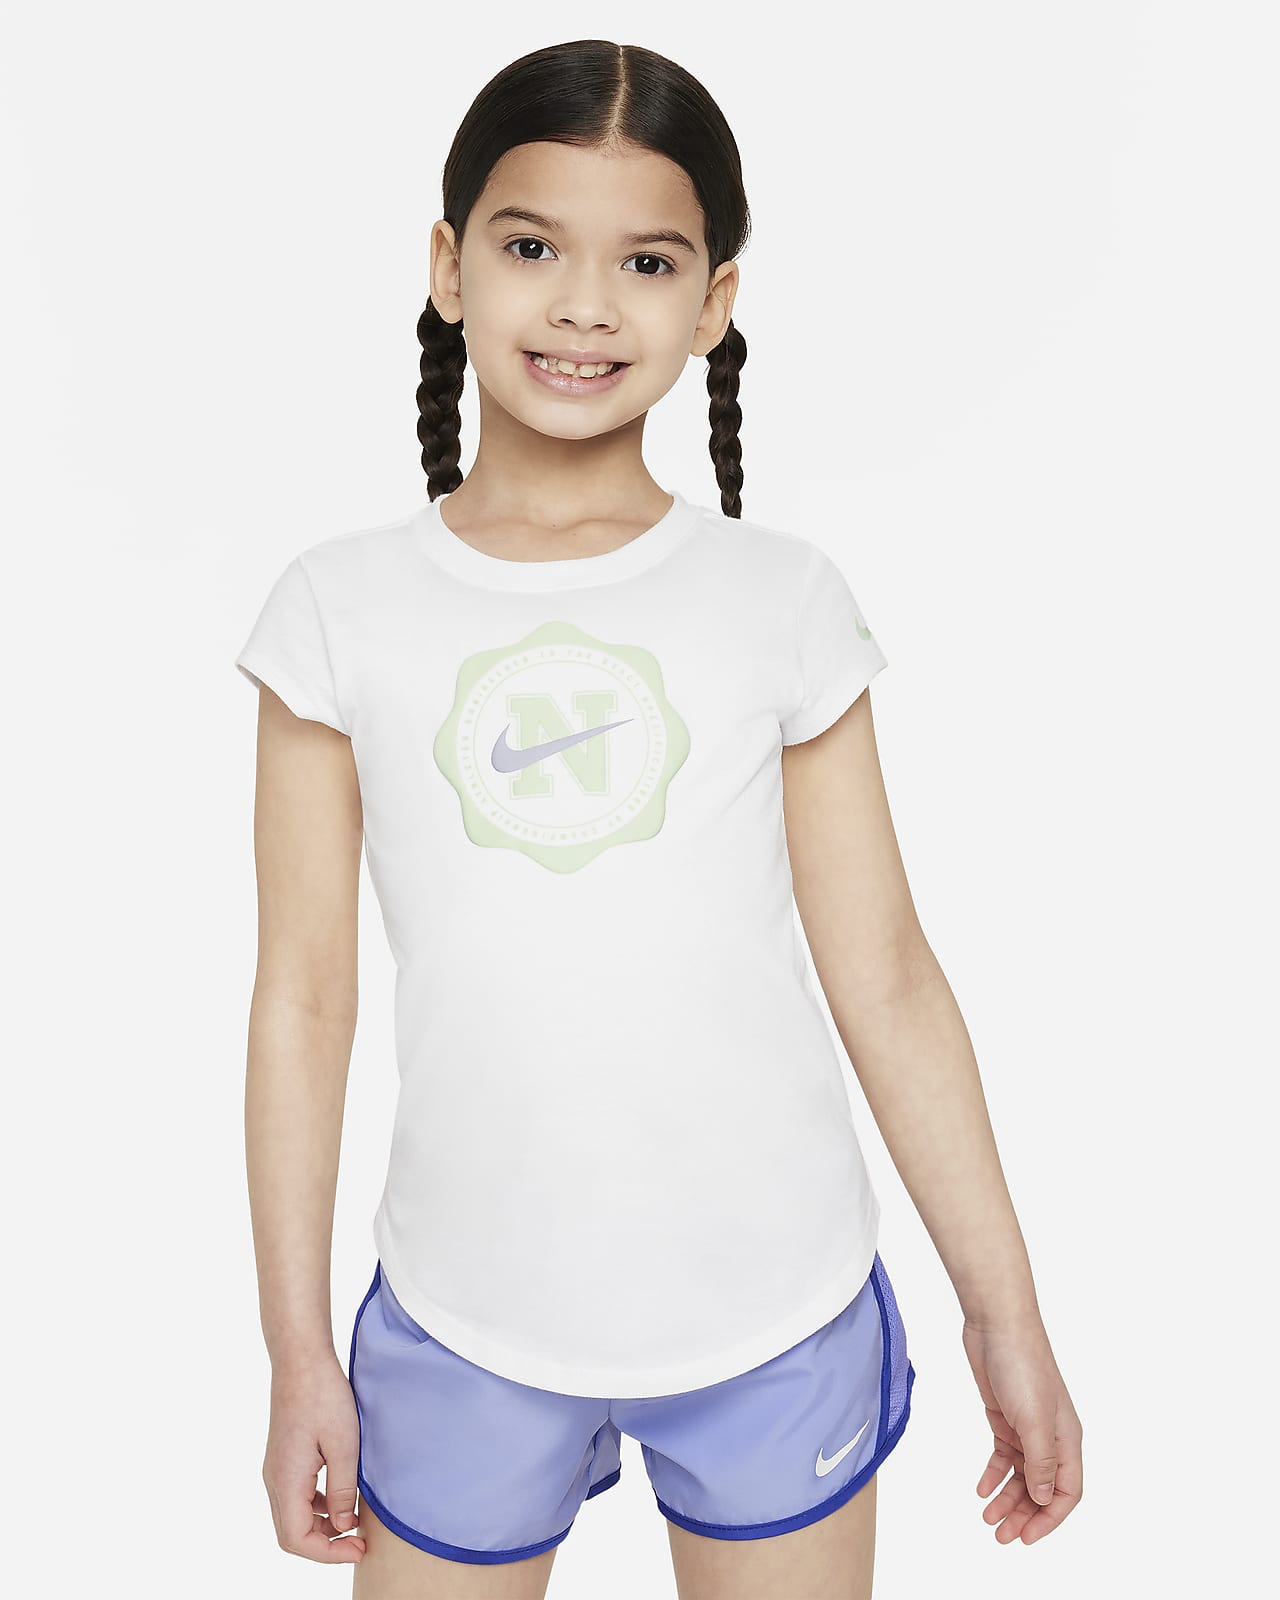 Nike Prep in Your Step Younger Kids' Graphic T-Shirt